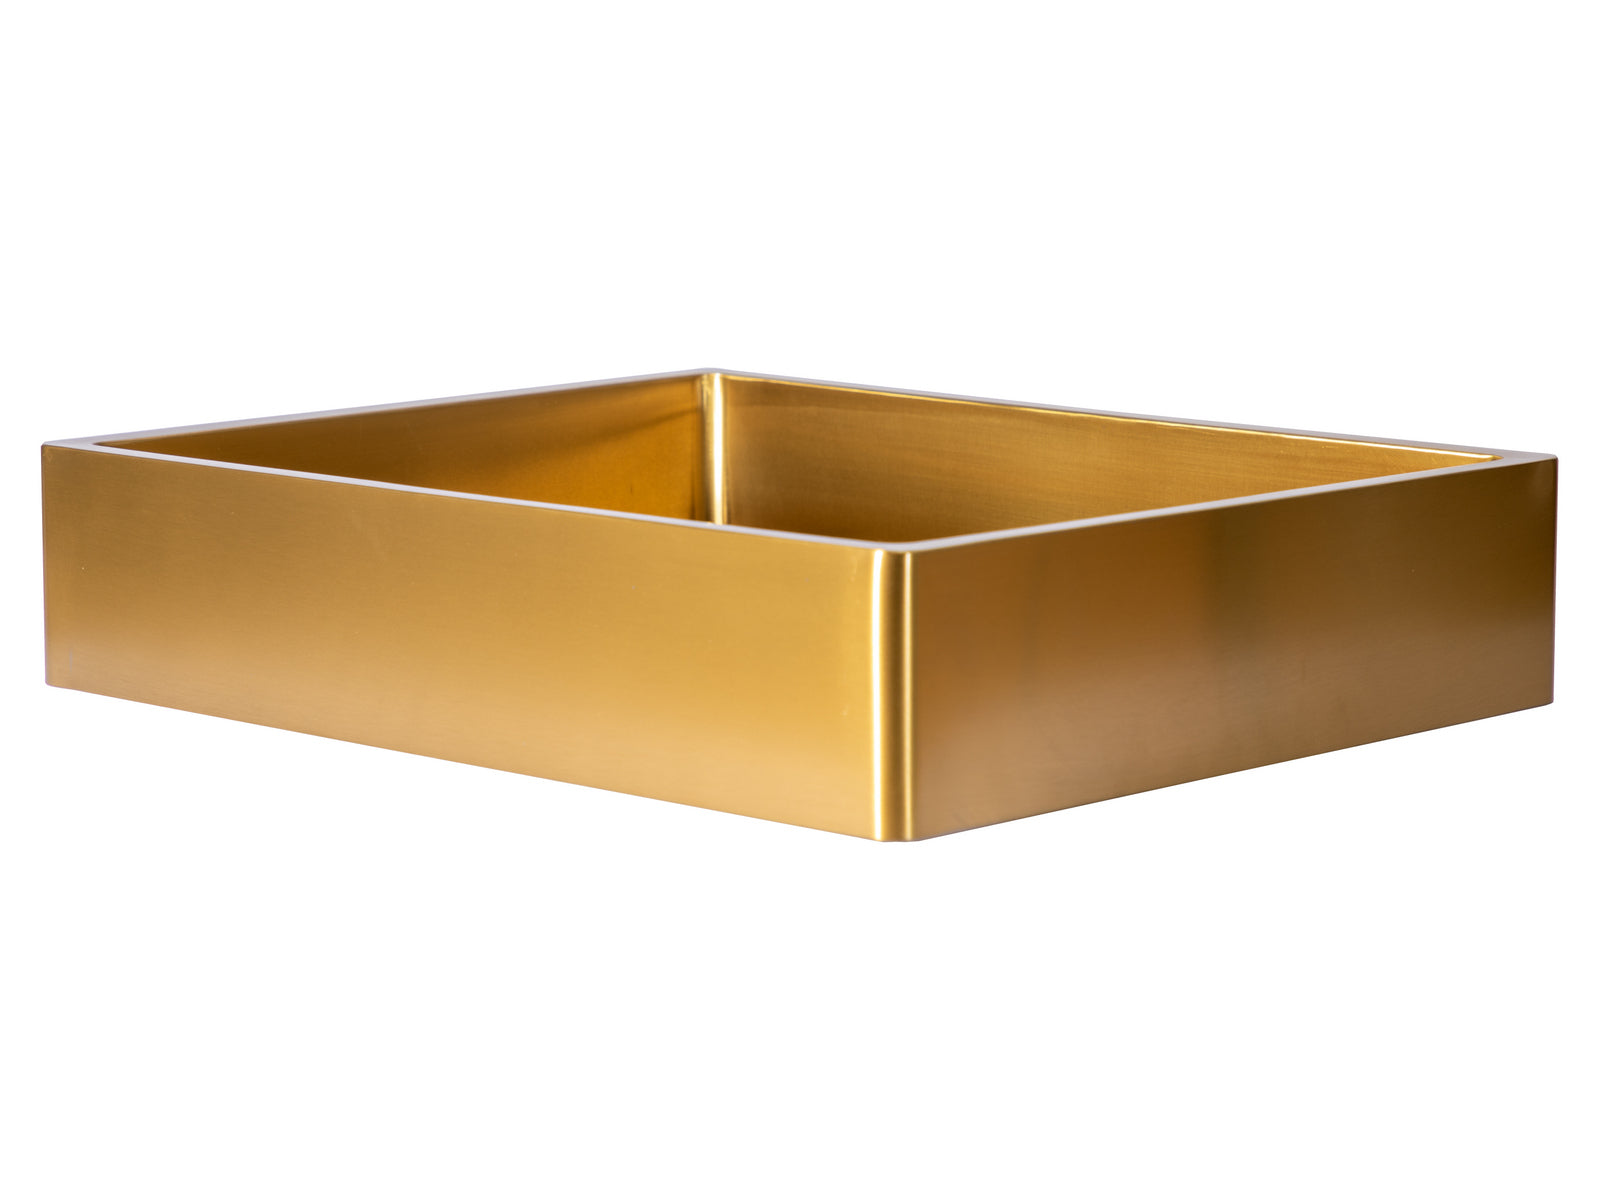 Rectangular 18 3/4" x 15 3/4" Thick Rim Stainless Steel Bathroom Vessel Sink with Drain in Gold